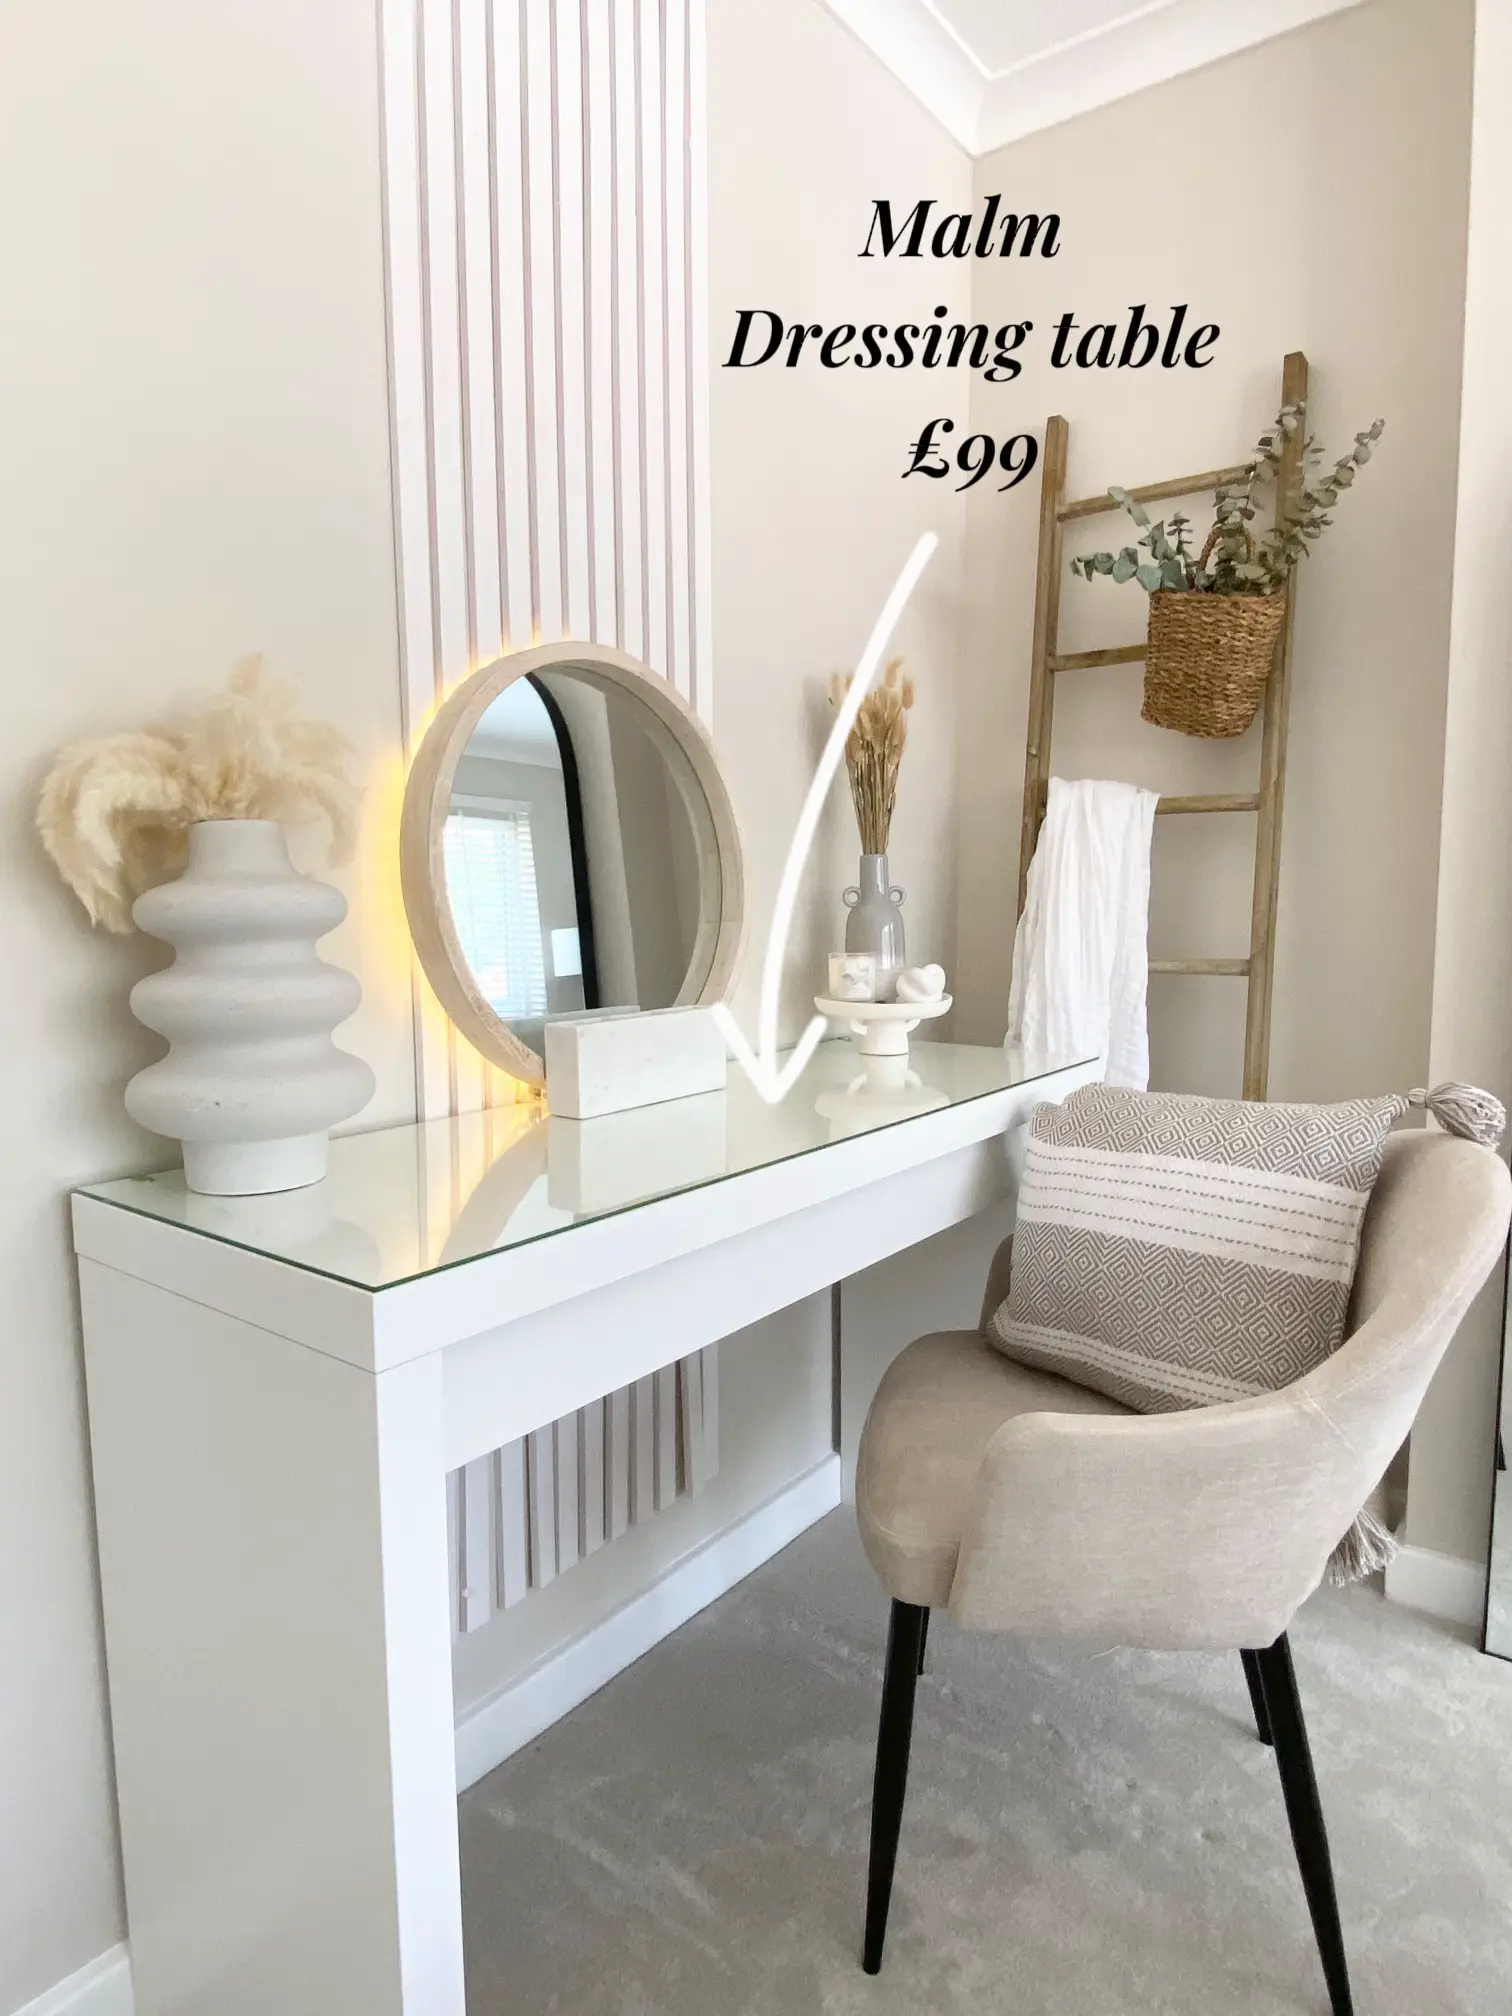 I gave my £89 Ikea Malm dressing table a modern makeover using a £3 B&Q buy  - people can't believe how good it looks